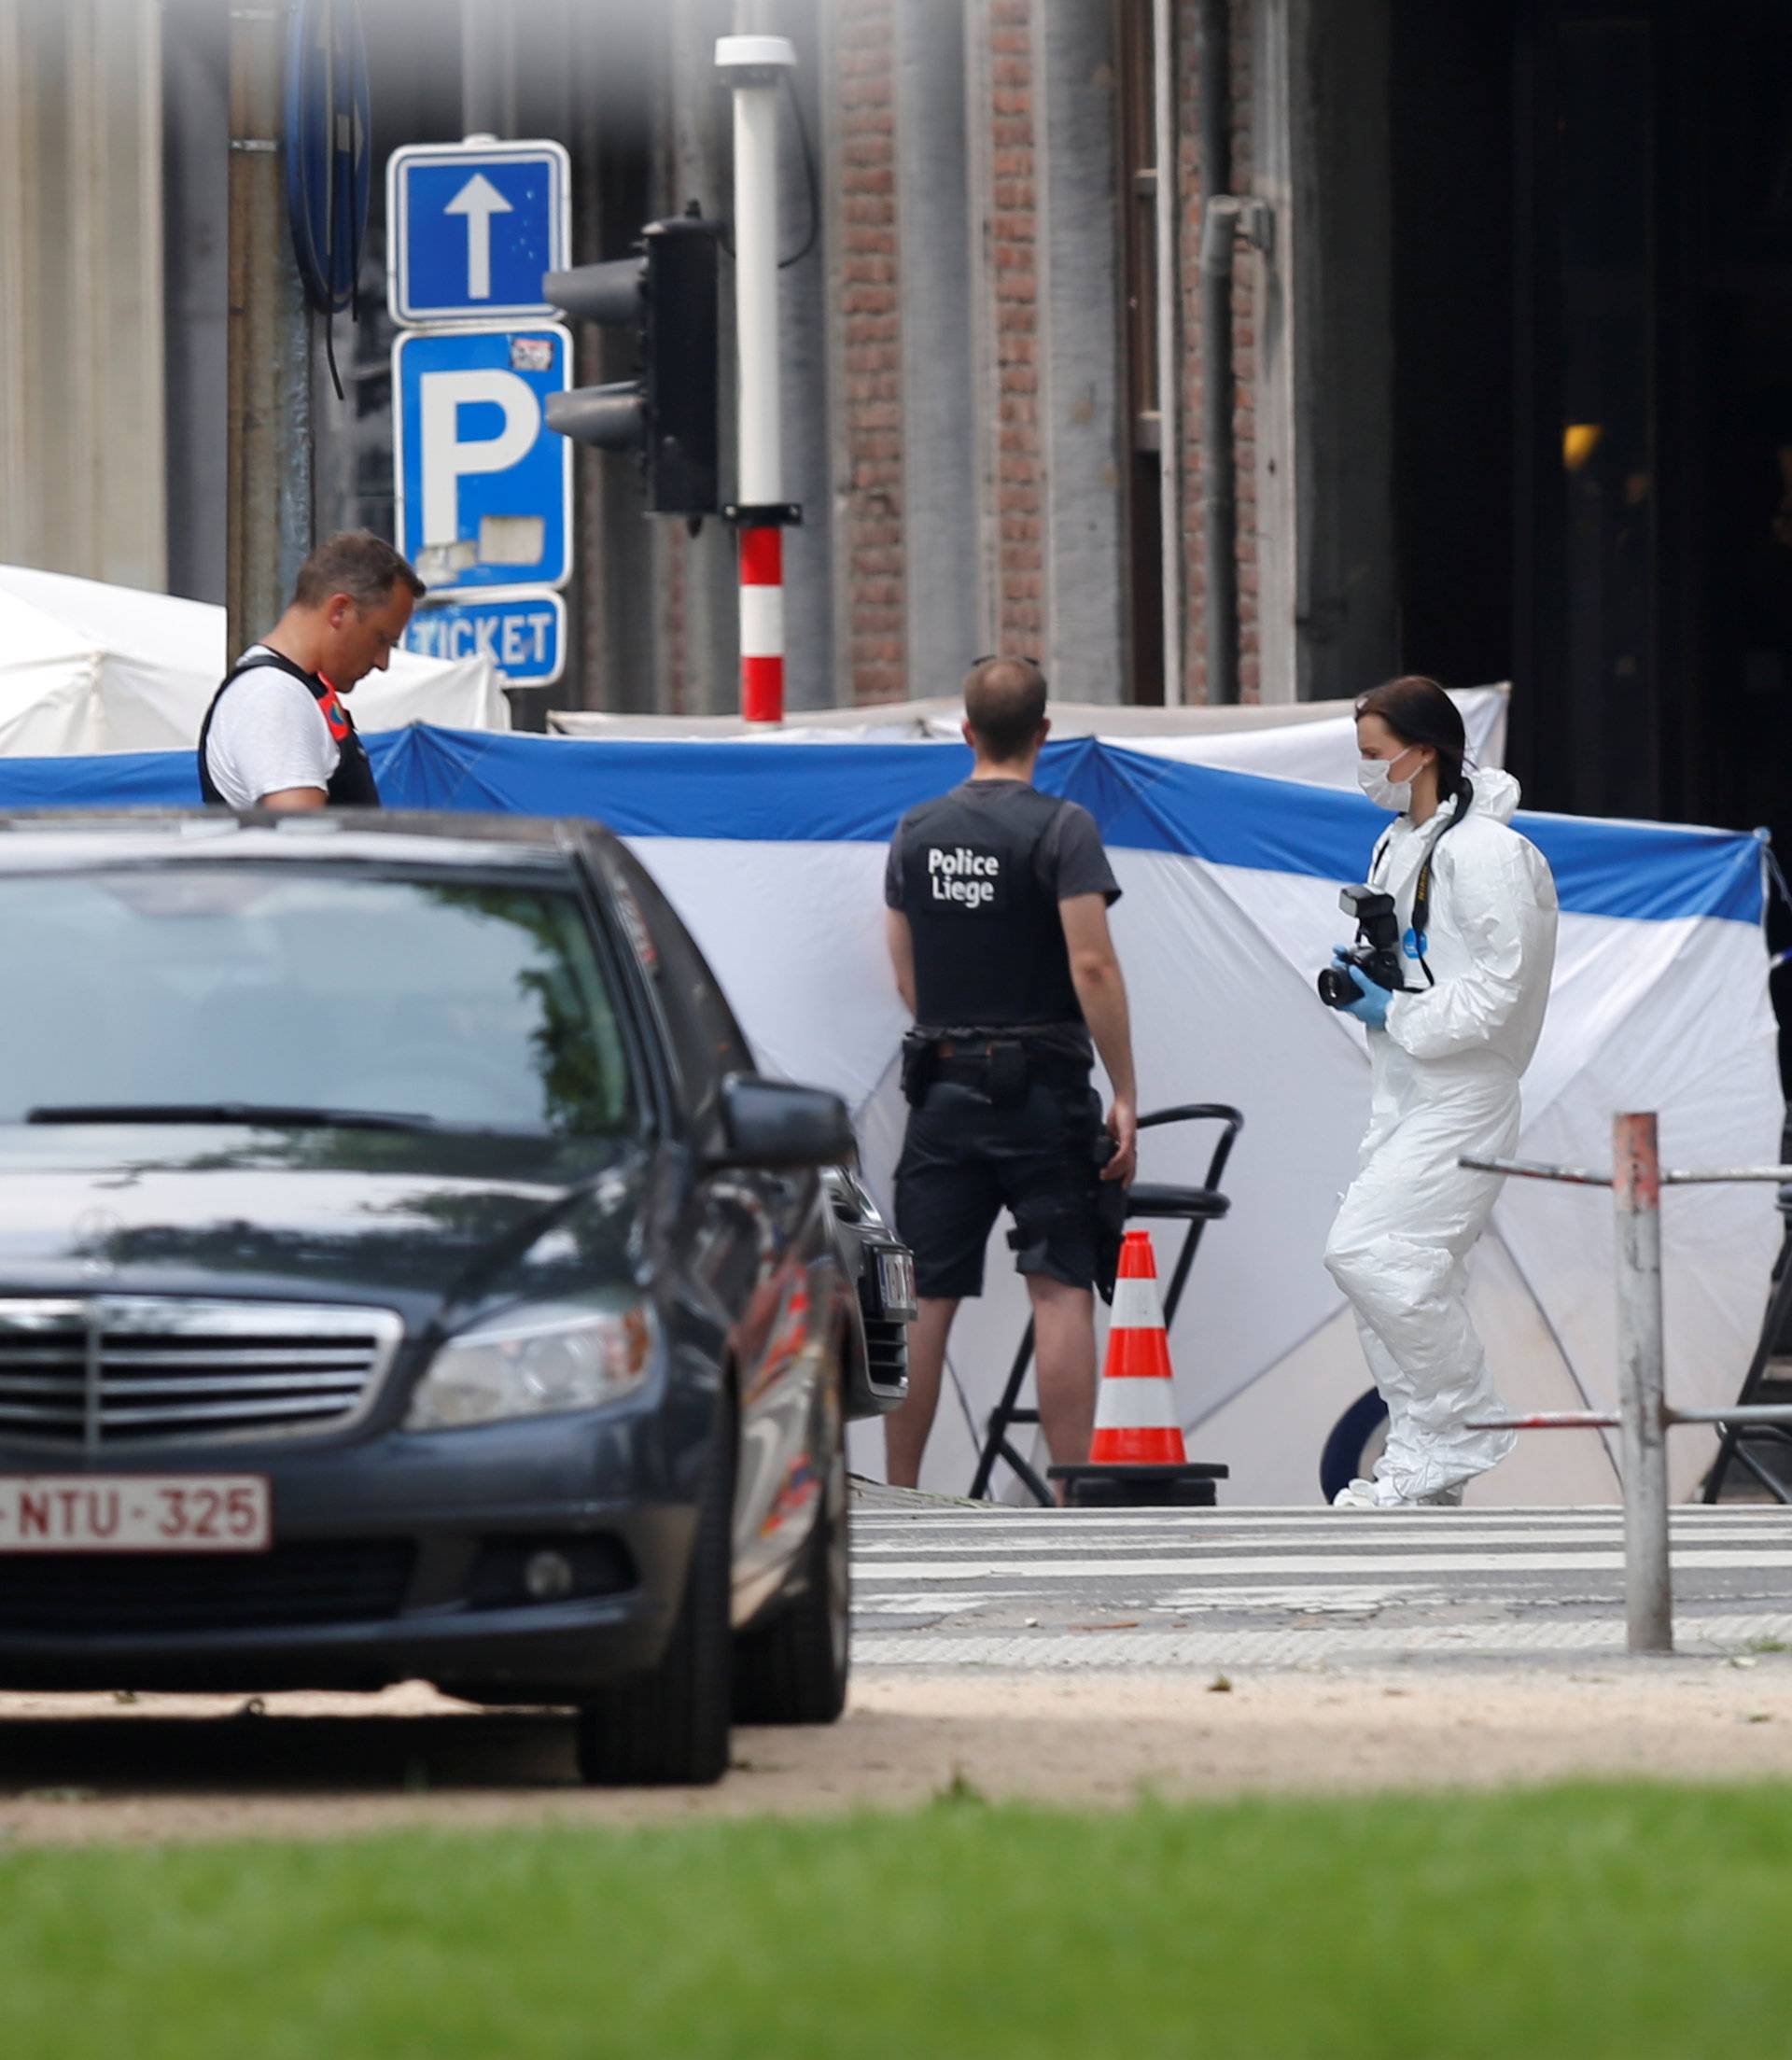 Police officers and forensics experts are seen on the scene of a shooting in Liege